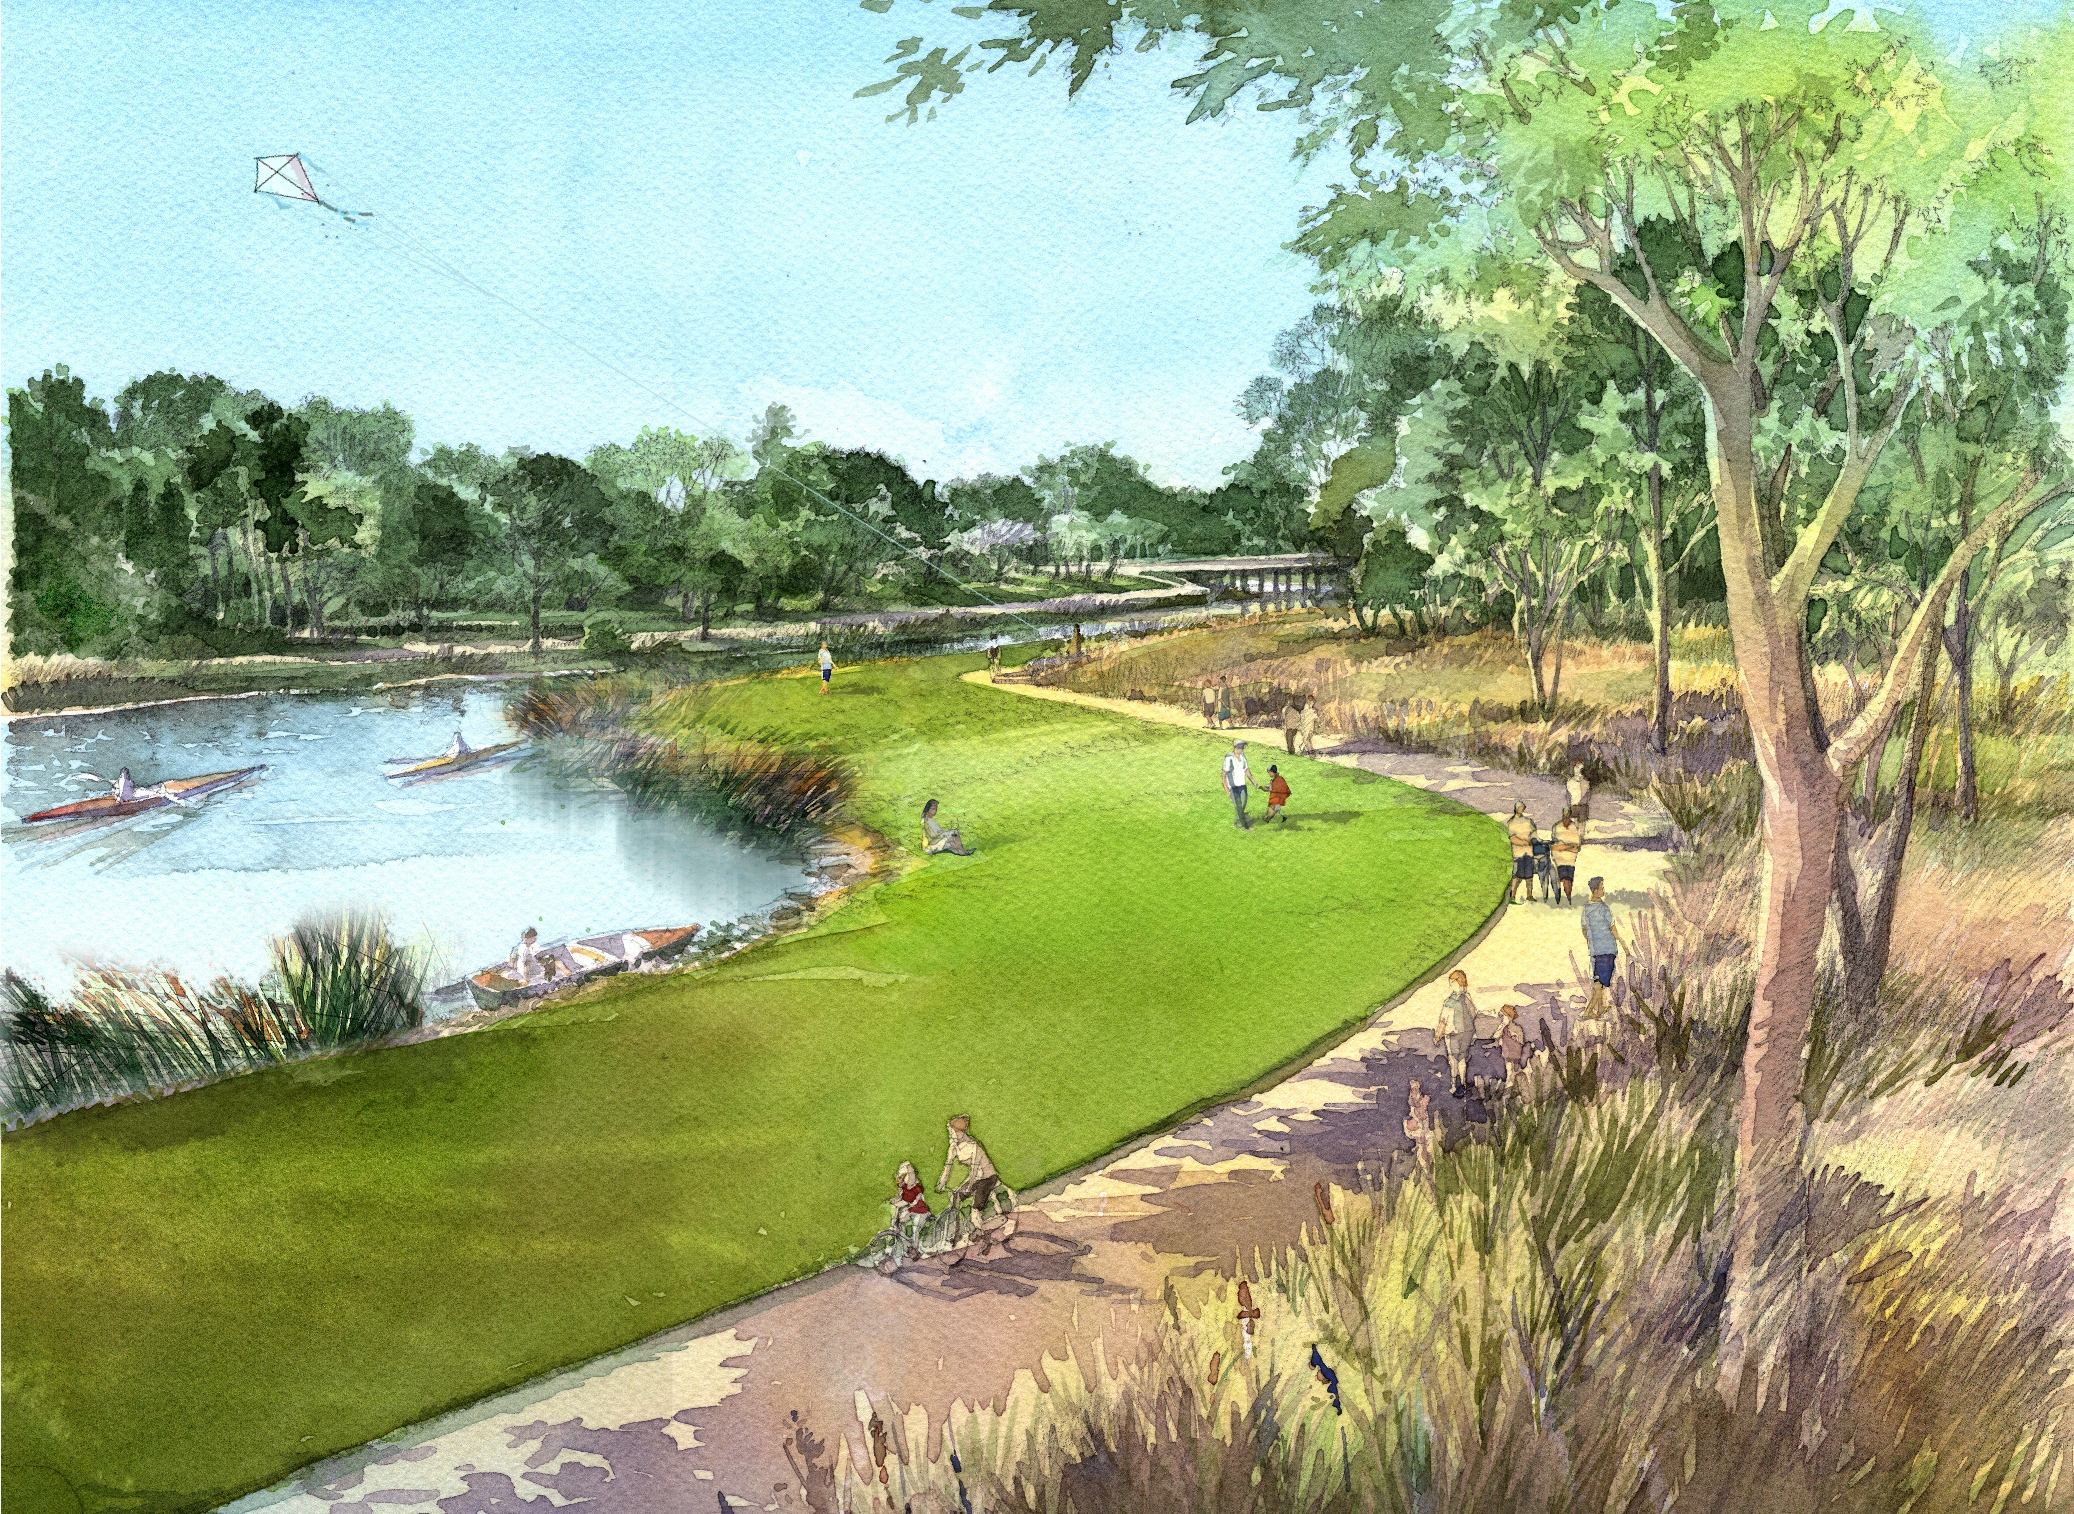 Upon completion of the Bayou Greenways 2020, it is estimated that 6 out of 10 Houstonians will live within a mile and half of a bayou park or trail. Rendering by SWA Group